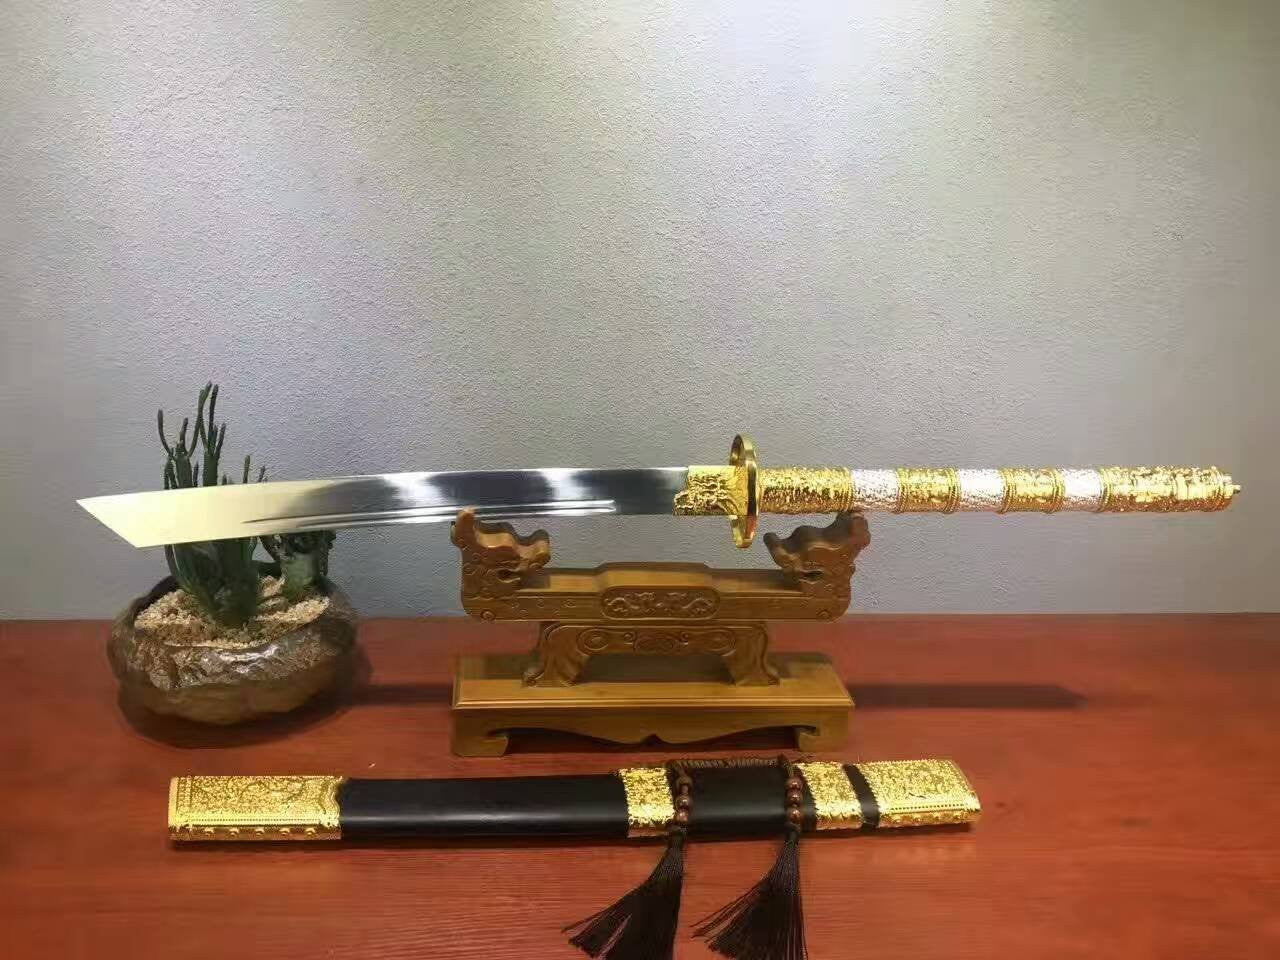 Kangxi collection sword,Damascus steel,Alloy,Black scabbard - Chinese sword shop